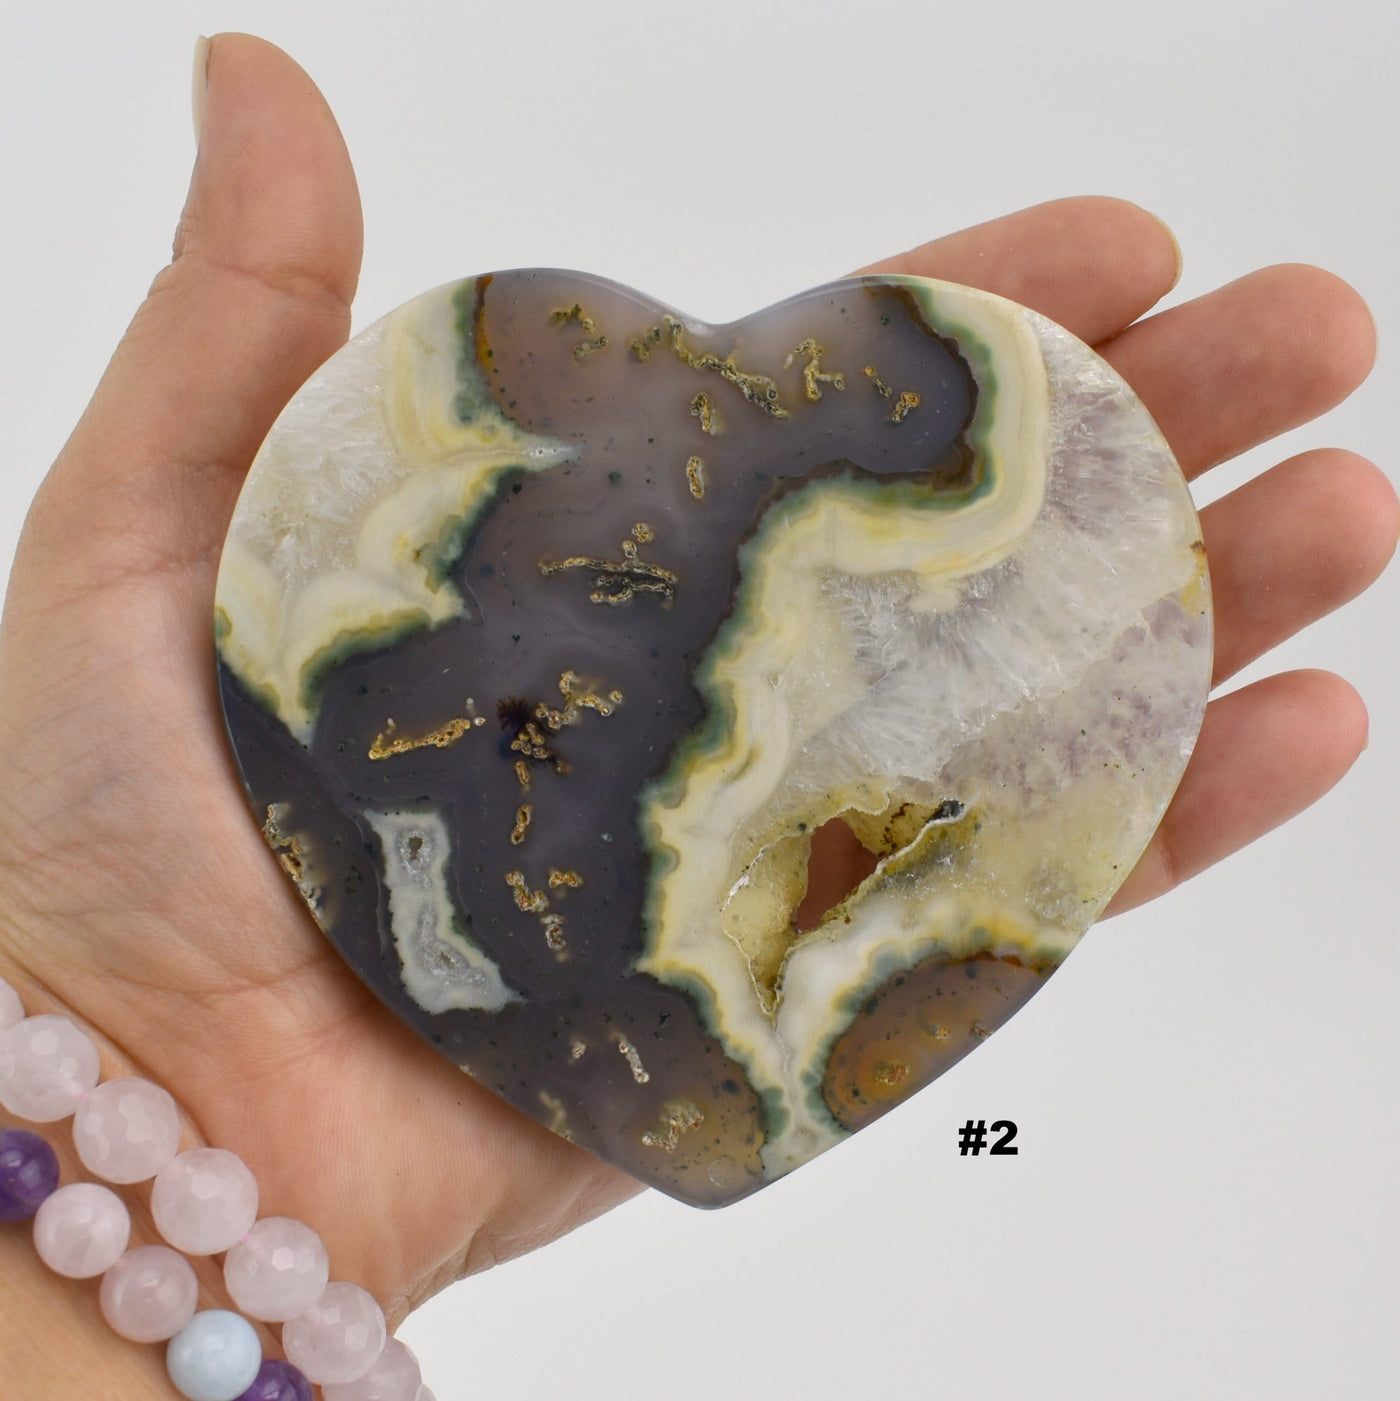 Close up of agate heart slice #2 in a hand.